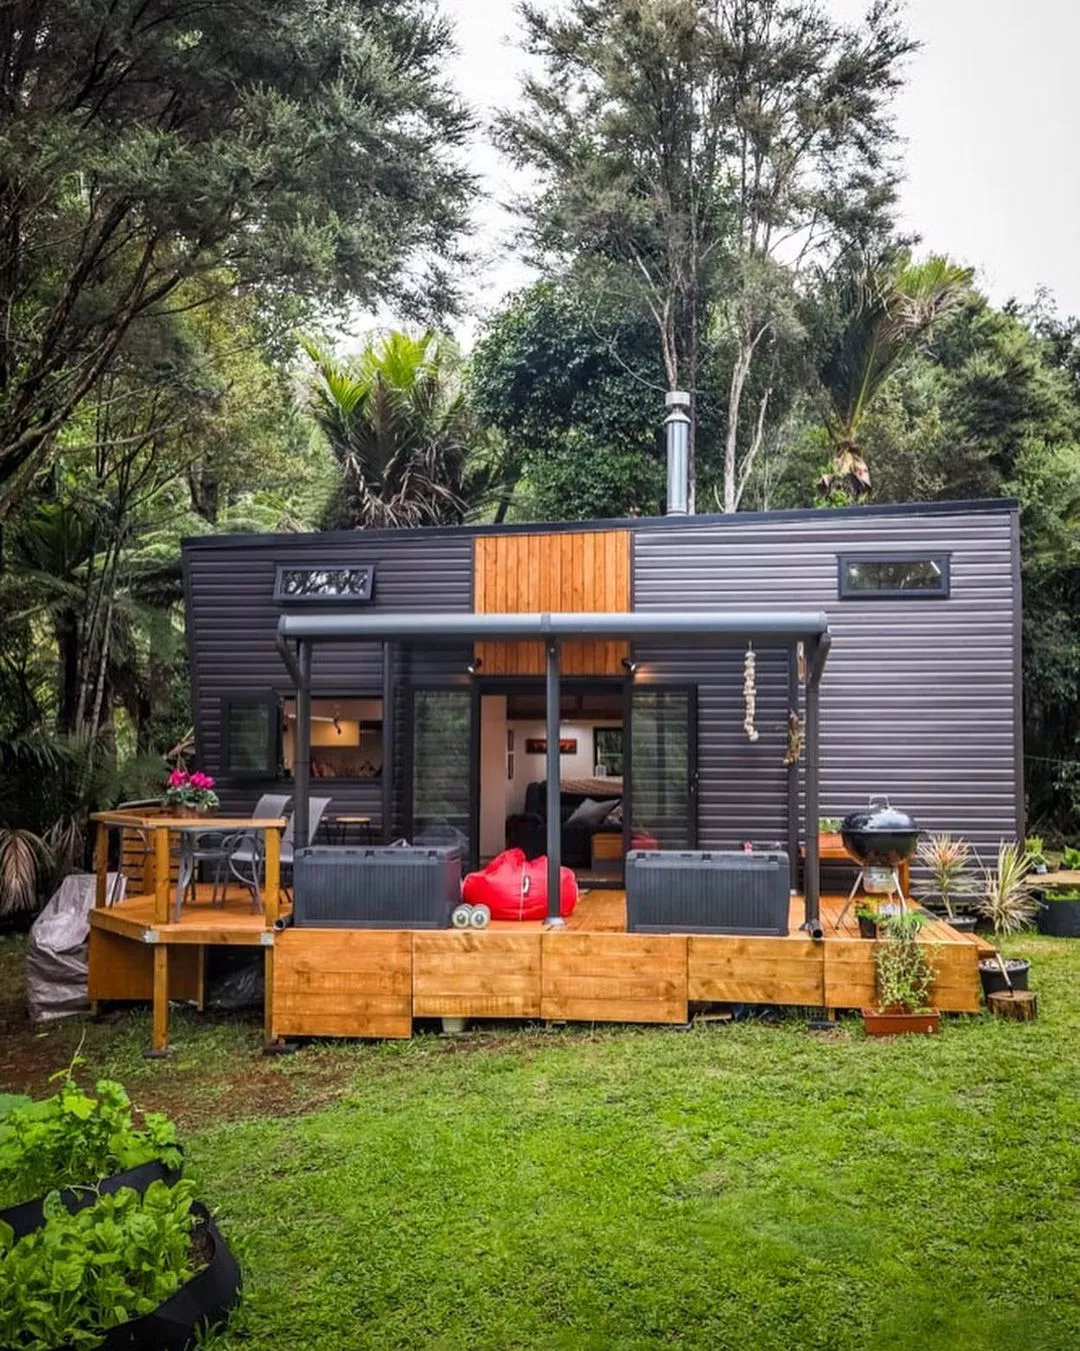 How Much Does It Cost to Build a Container Home? - Richr